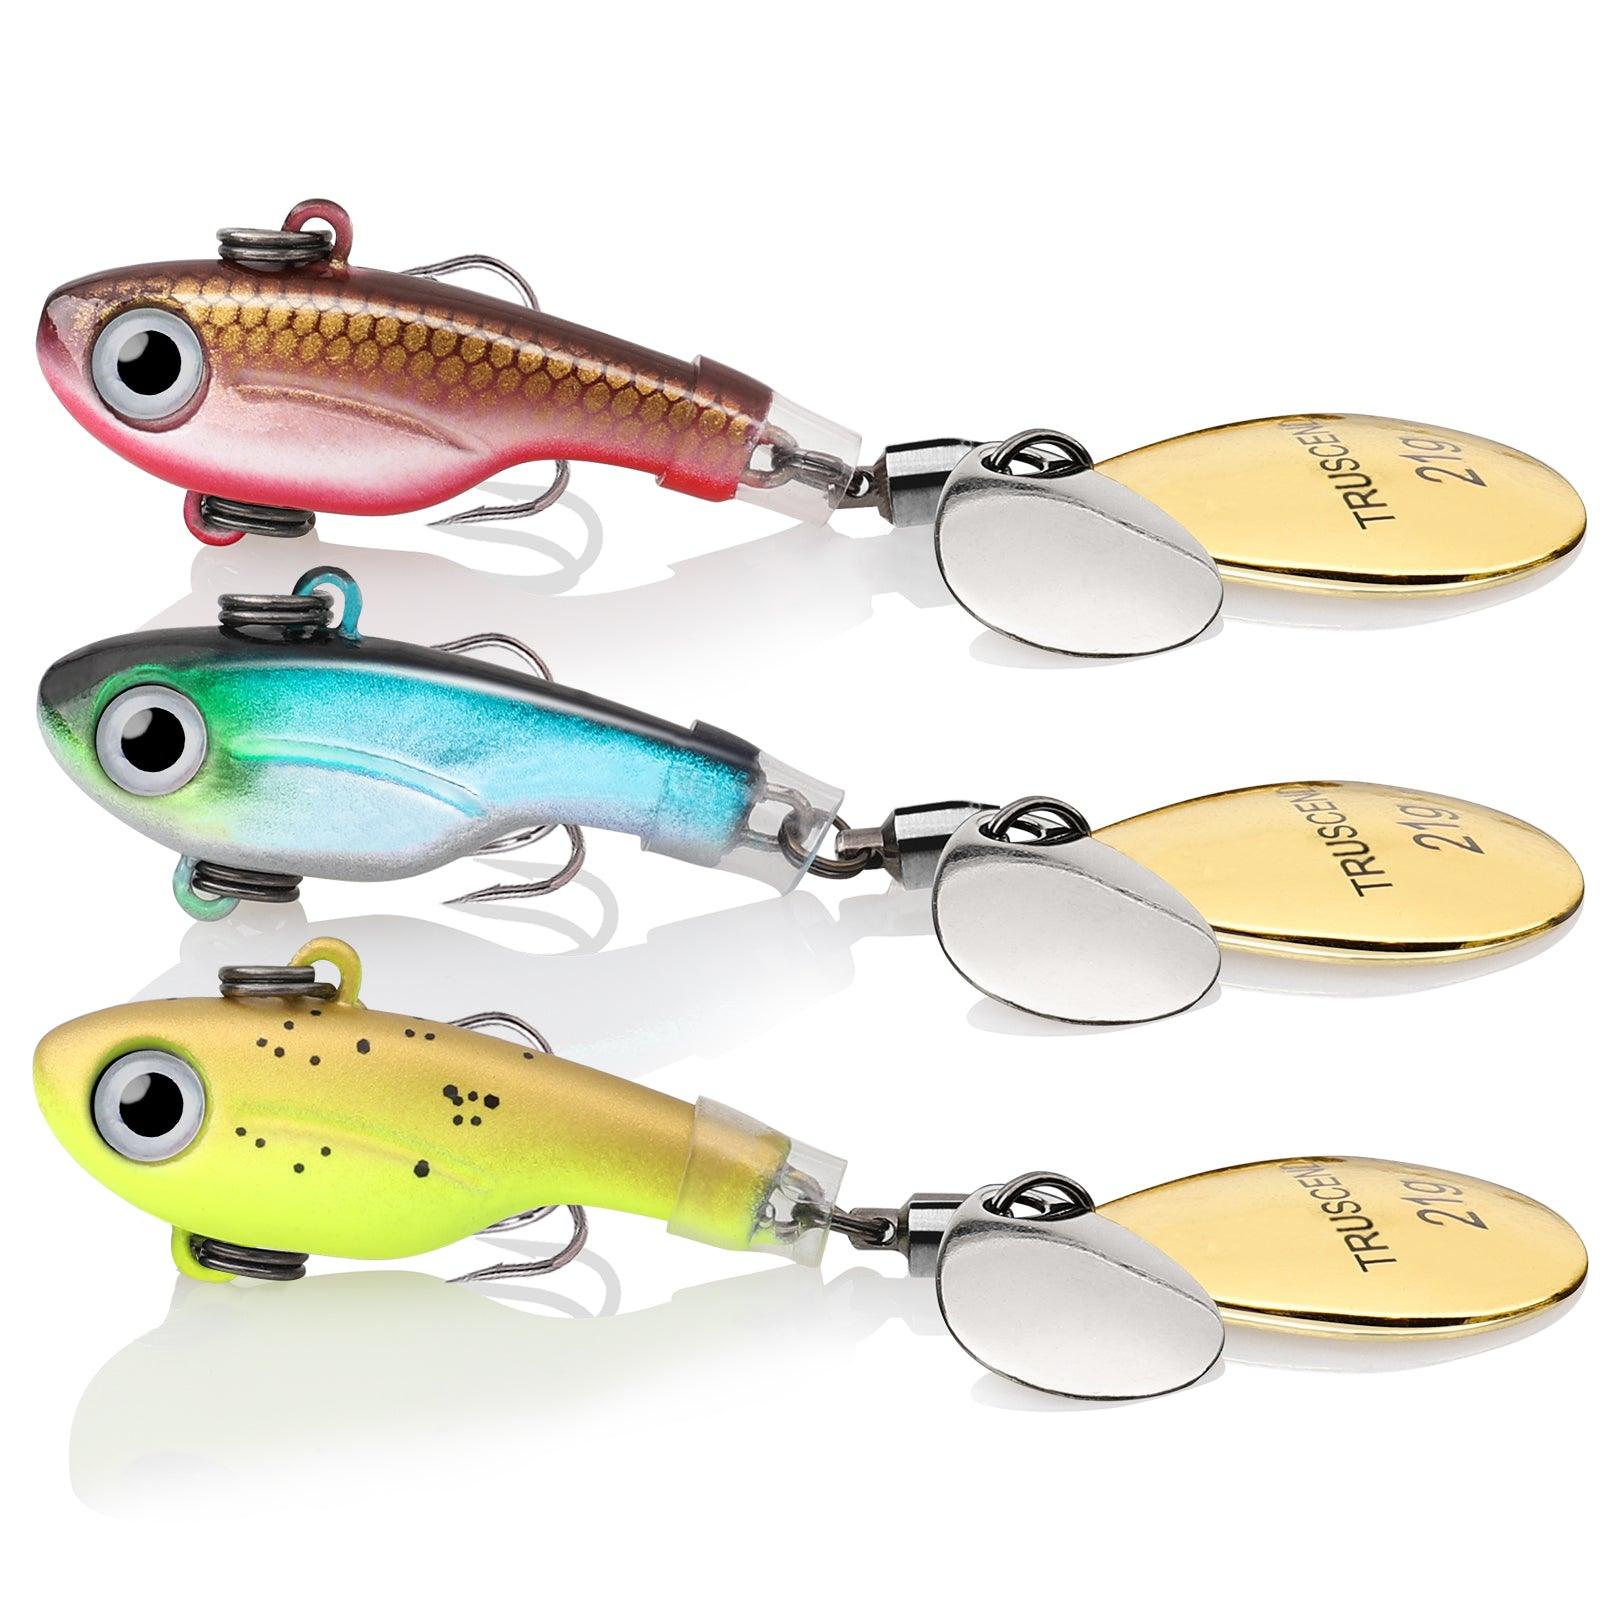 TRUSCEND Metal Fishing Lure with Spinner Blade - Truscend Fishing